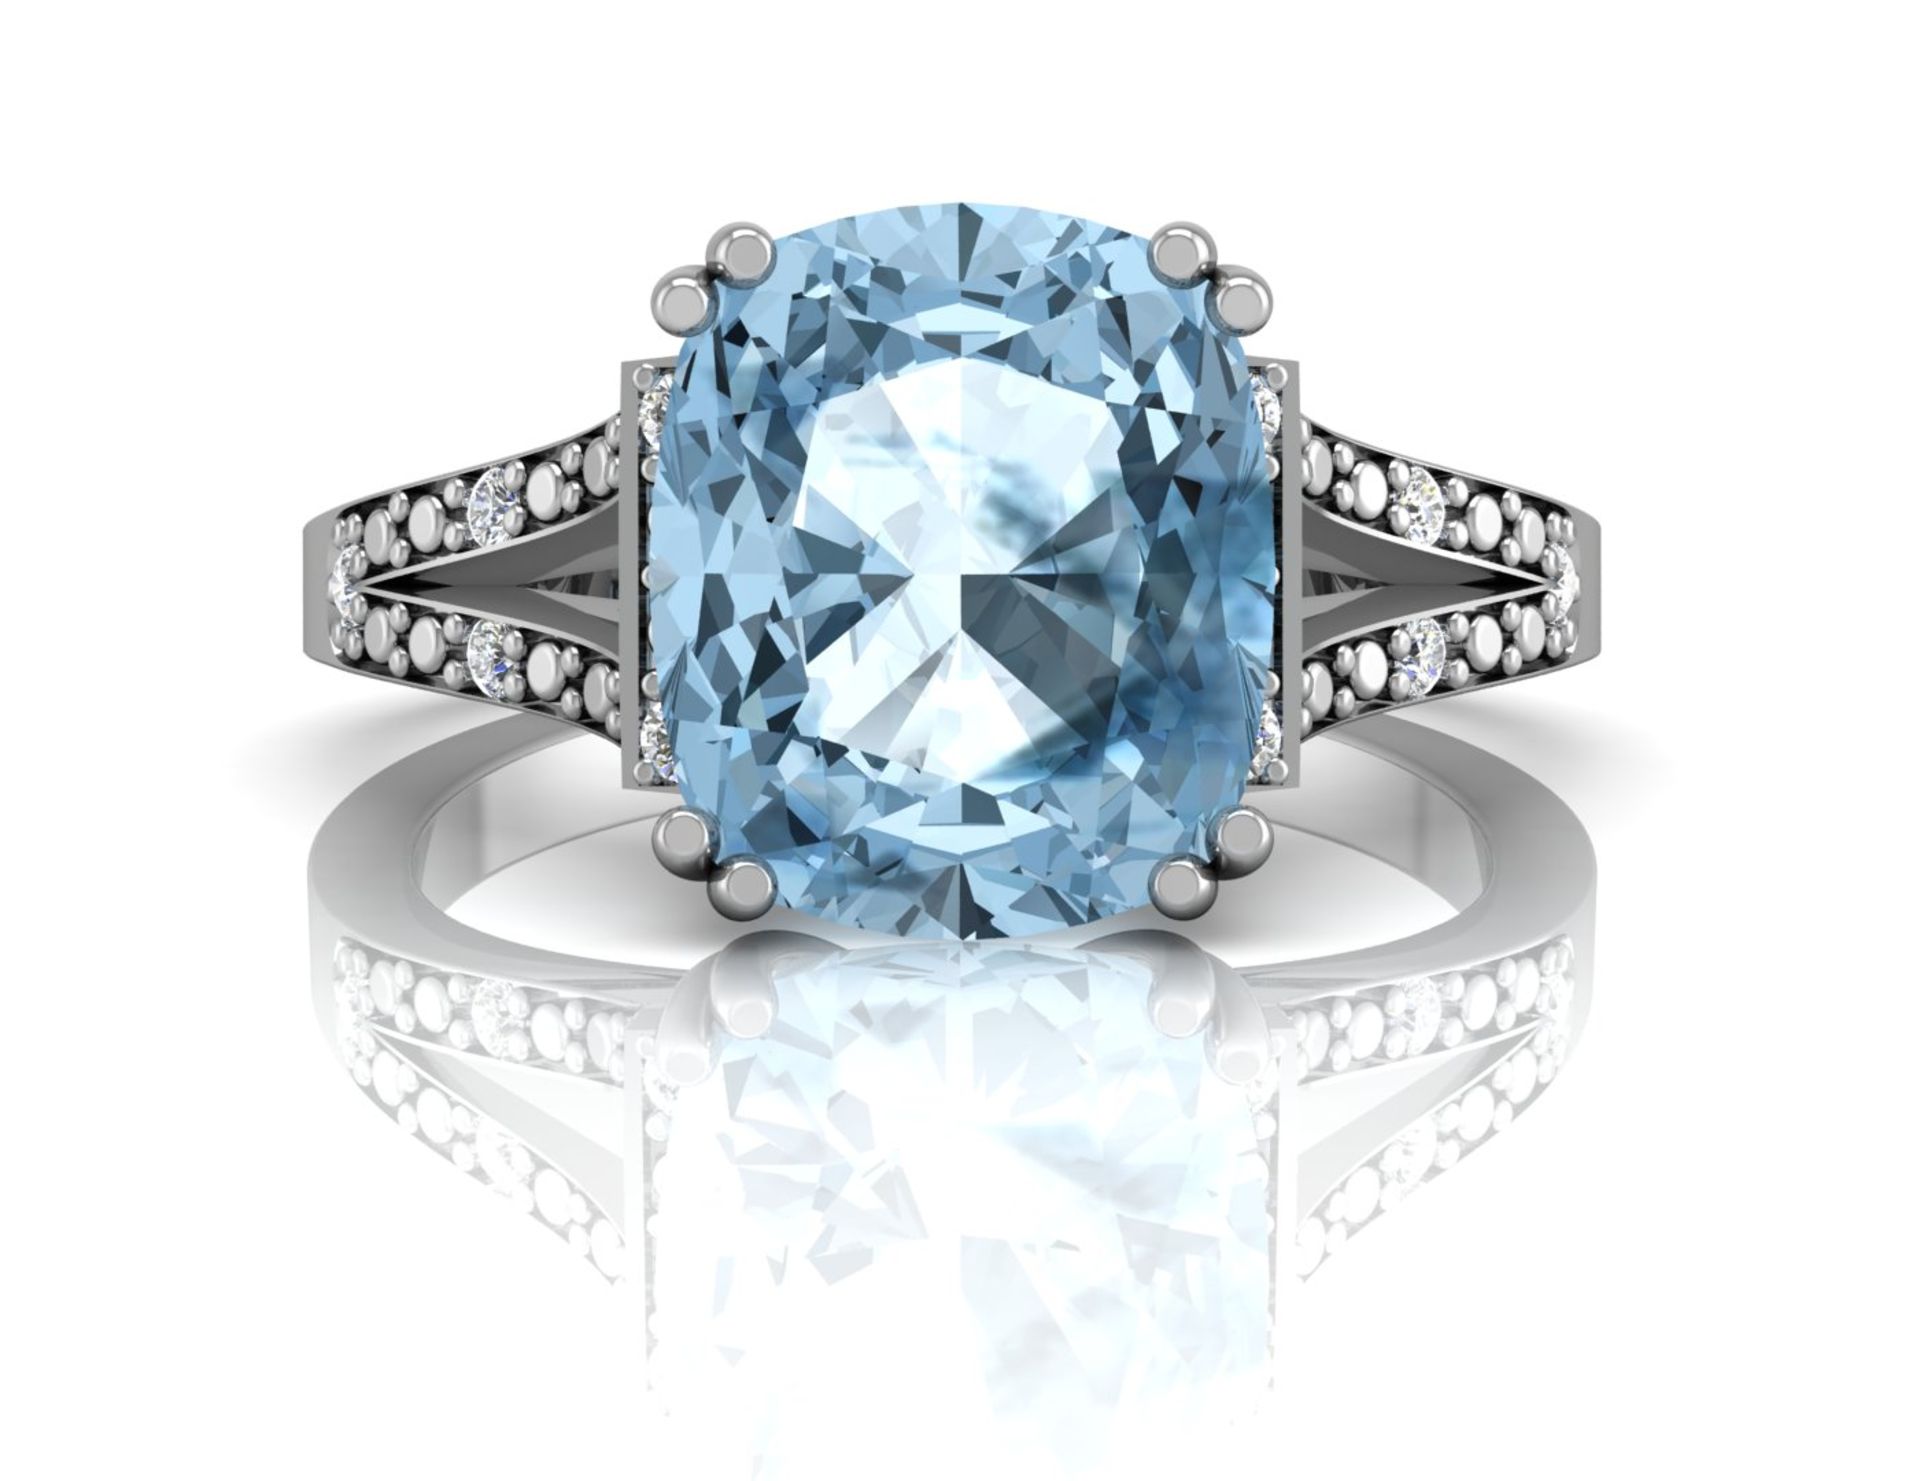 9ct White Gold Diamond And Blue Topaz Ring 0.07 Carats - Valued by GIE £2,945.00 - 9ct White Gold - Image 4 of 5